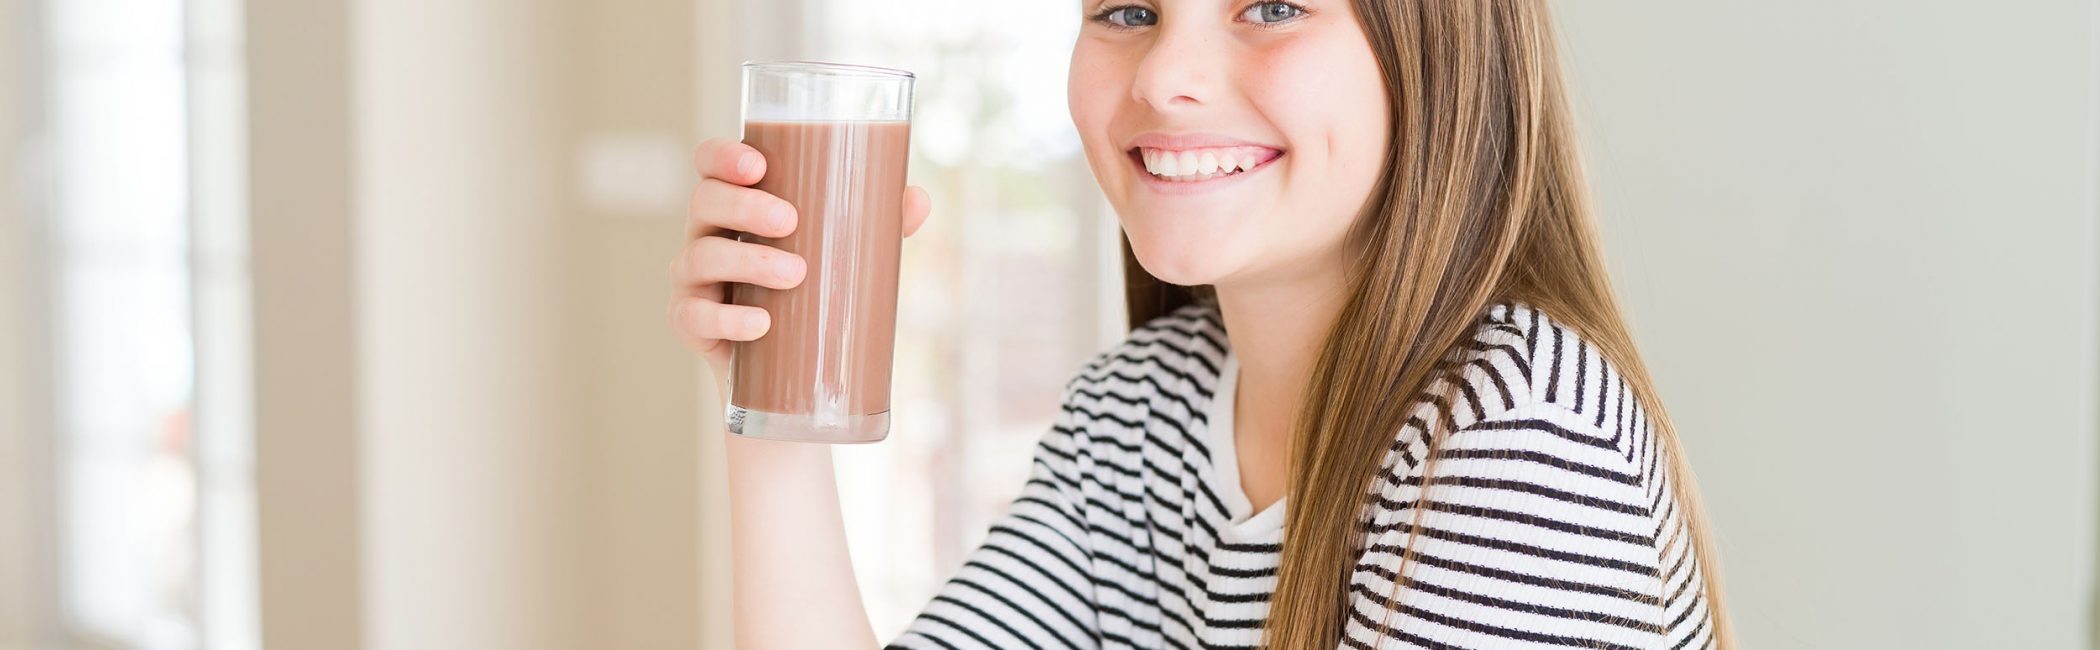 Beautiful young girl kid drinking fresh tasty chocolate milkshake as snack with a happy face standing and smiling with a confident smile showing teeth